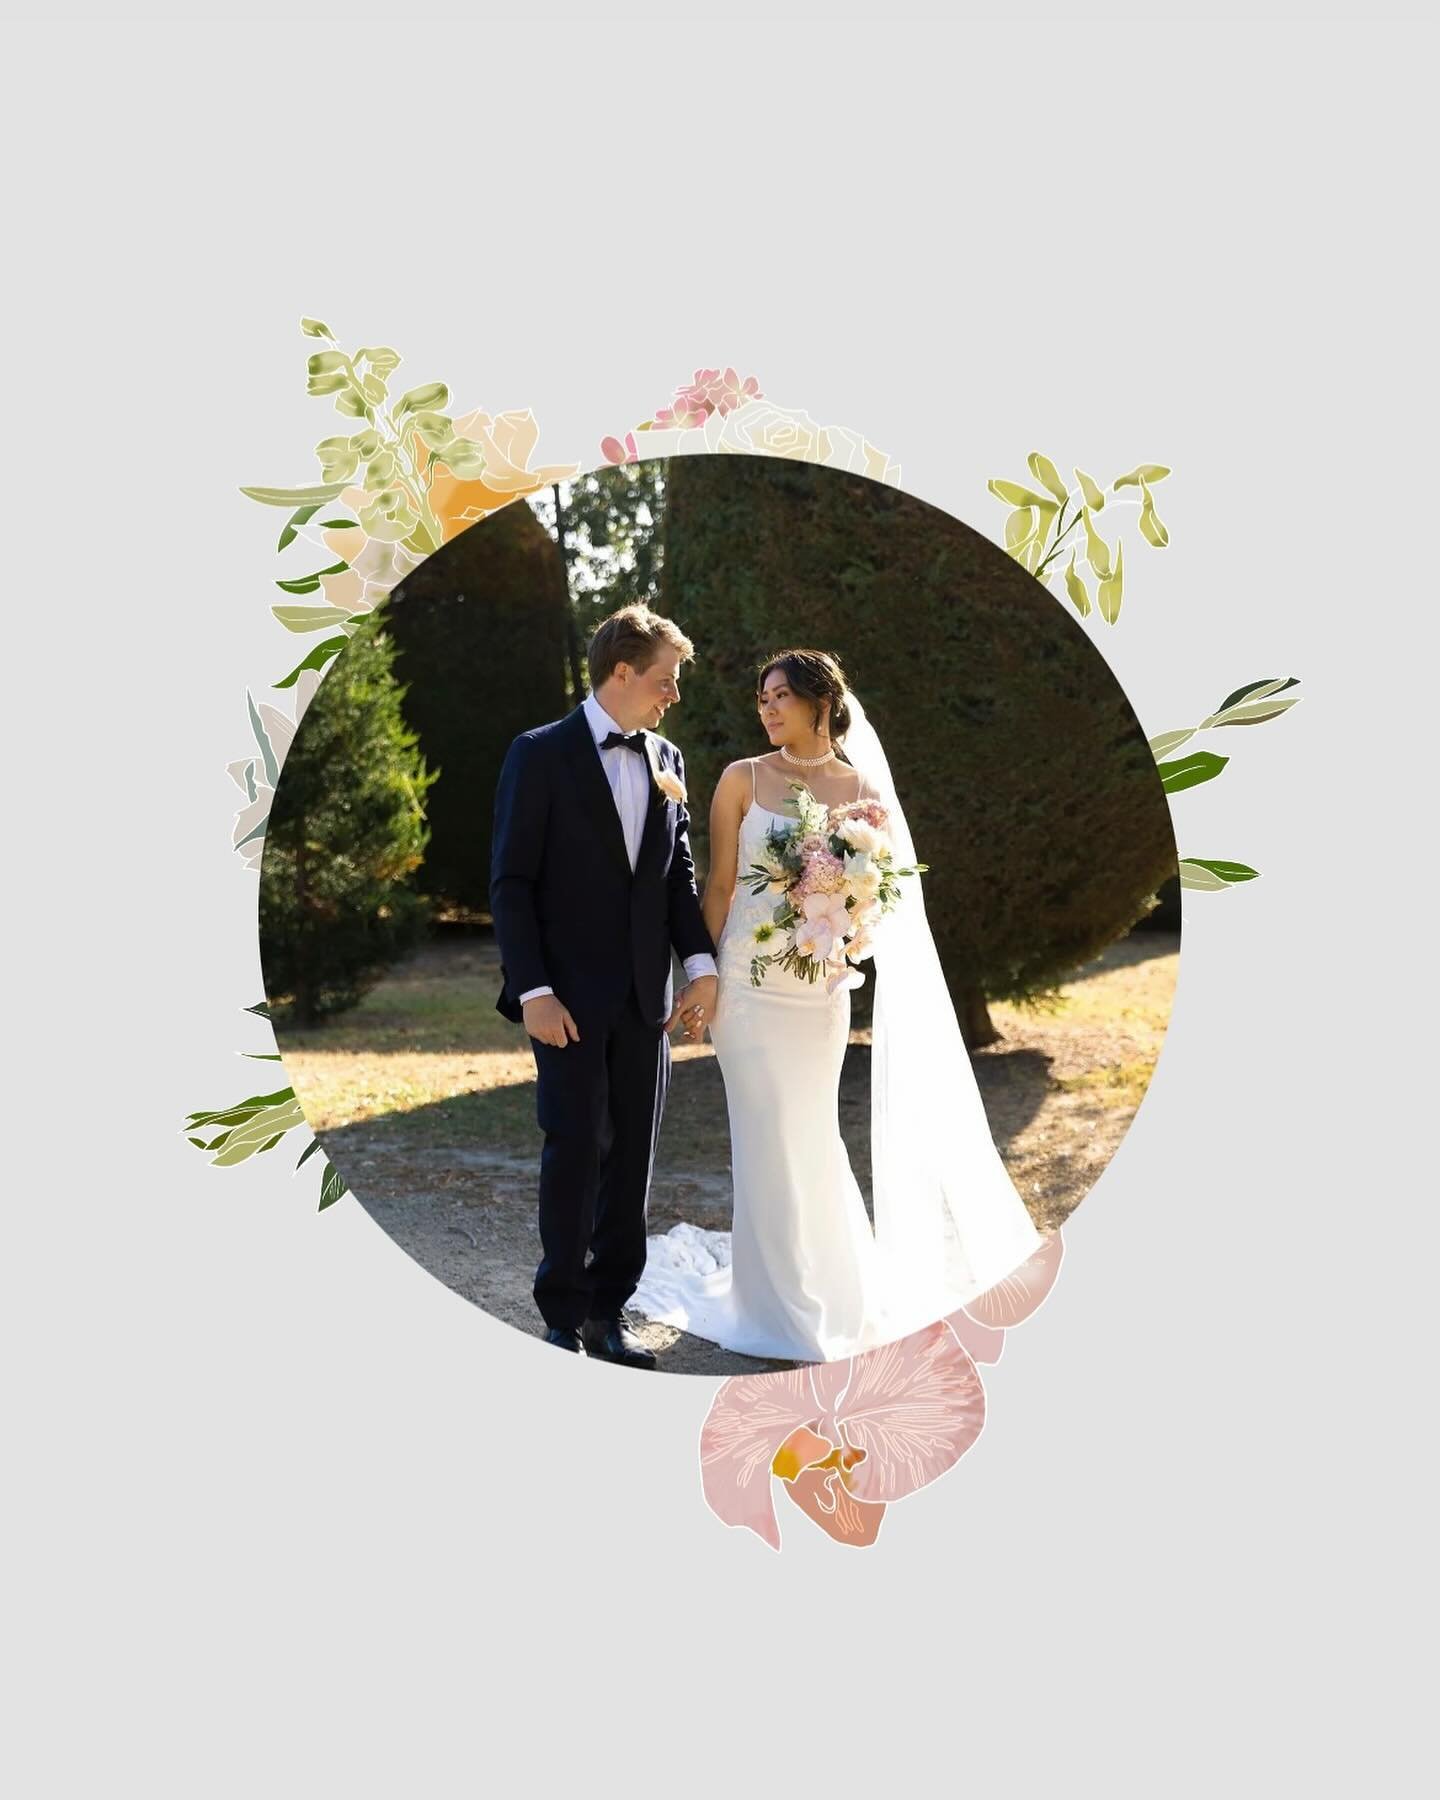 For Sze 🌸🌿🤍🩰🕊️

I loved this request because it truly represents what we do and how bespoke bouquet preservation can capture how you remember your special moments 🌷Since she accidentally dropped her bouquet a couple of times and some of the ste